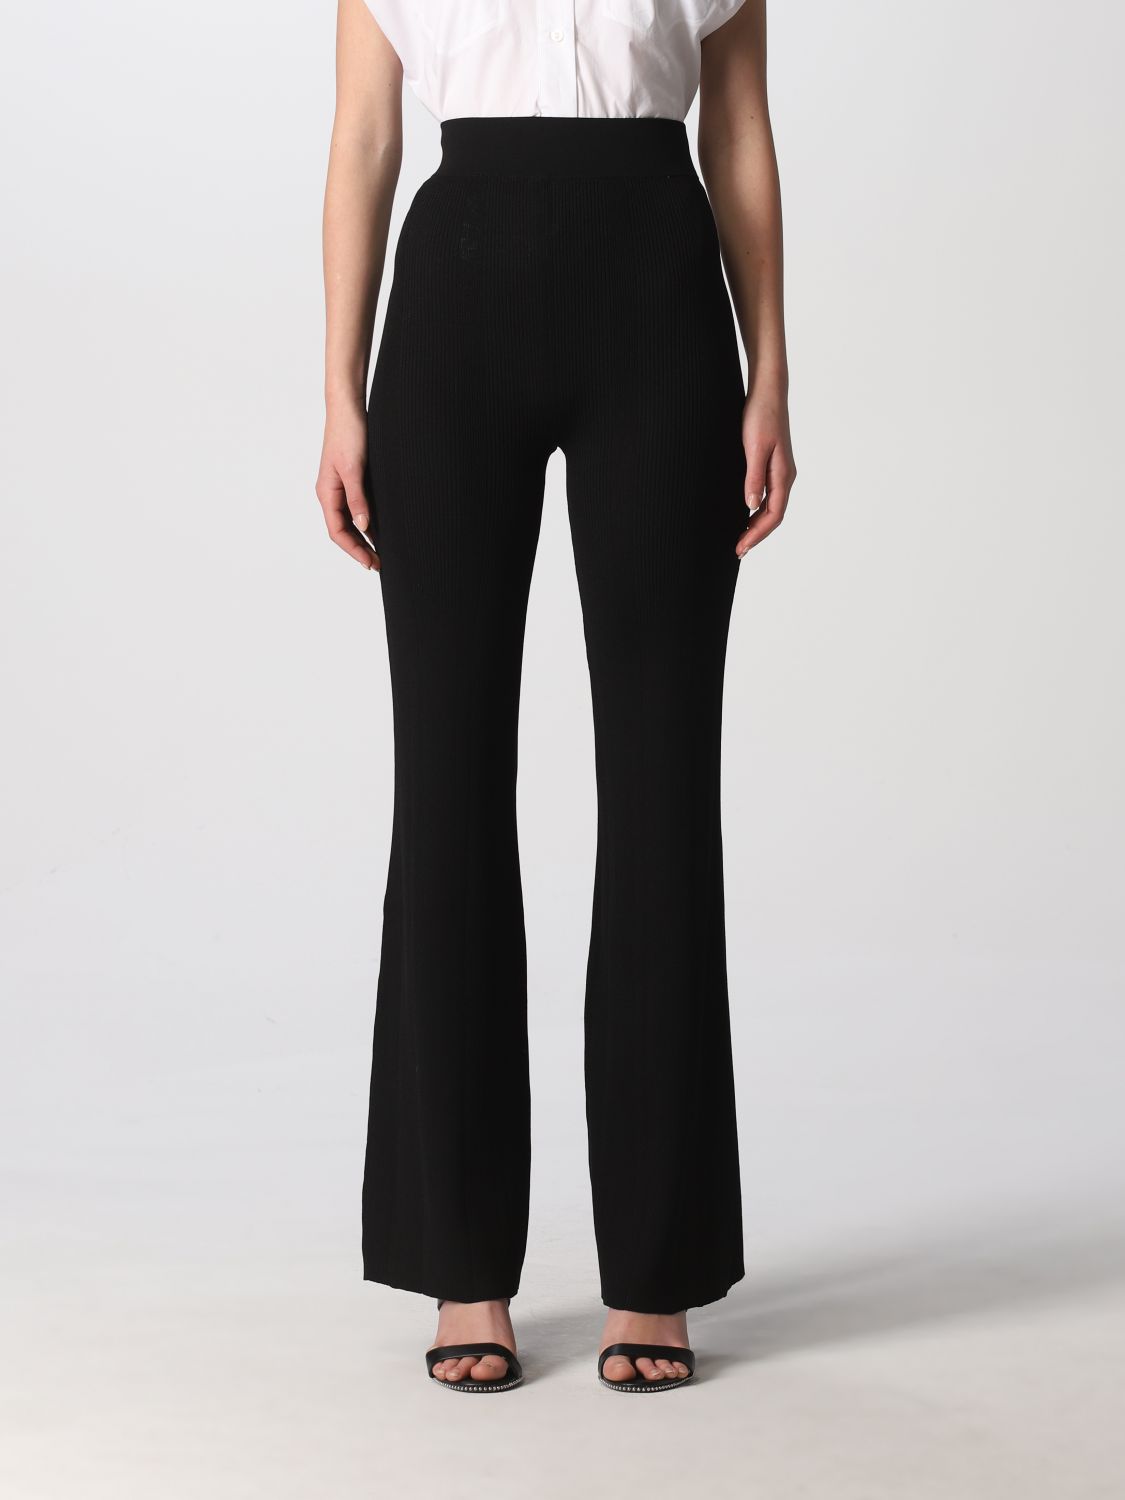 Trousers Remain: Remain trousers for women black 1